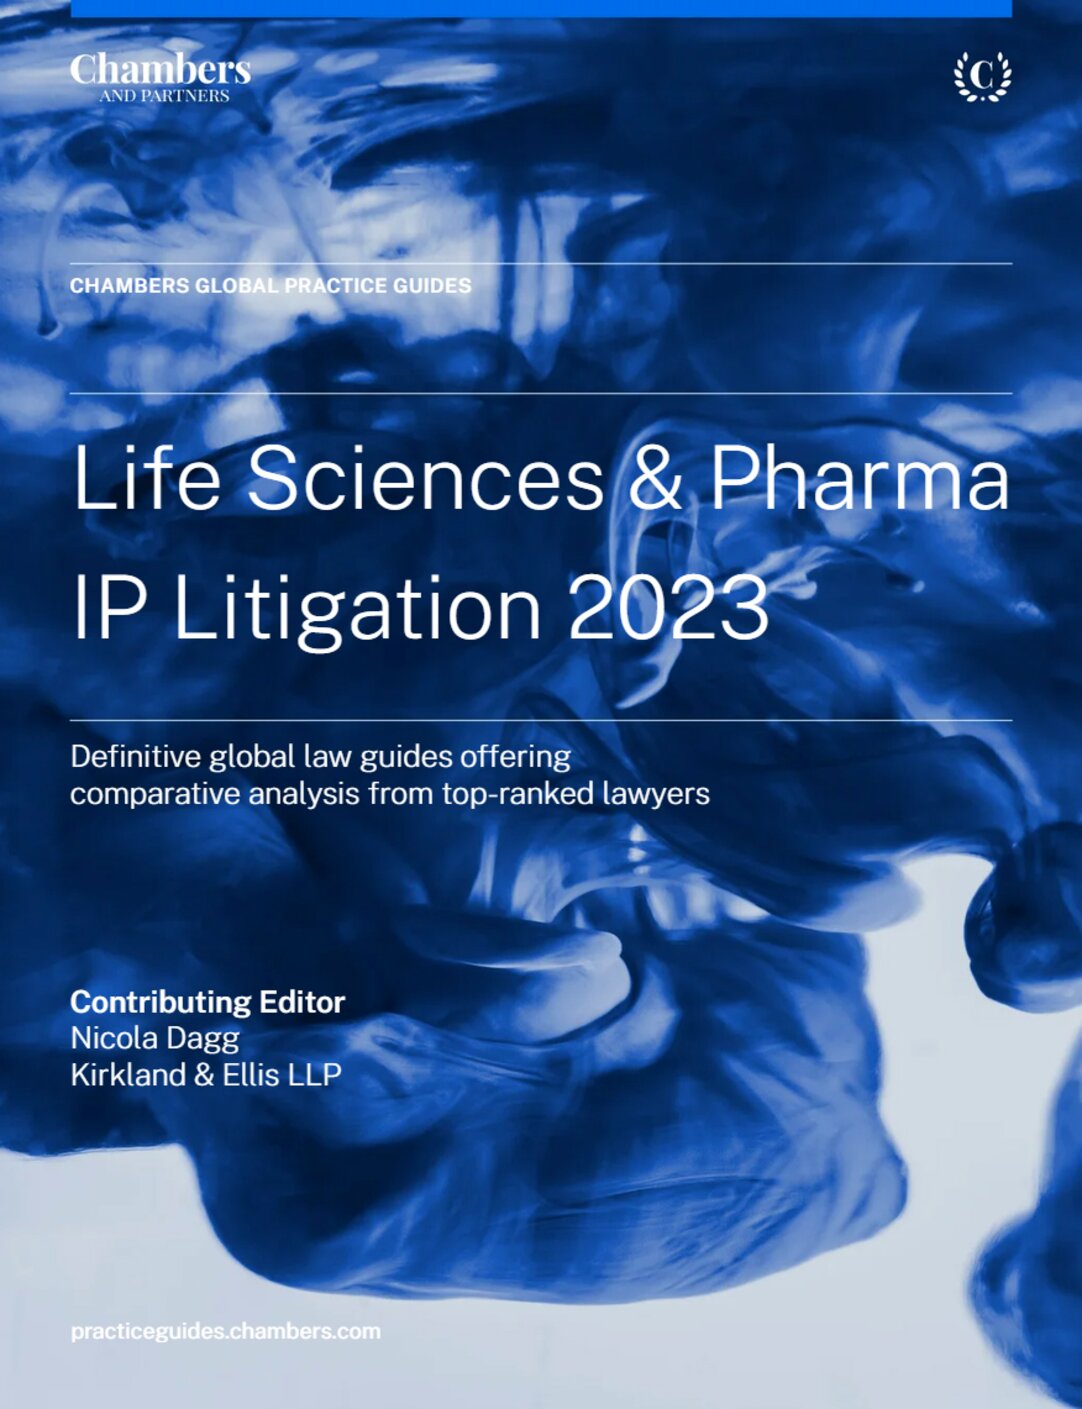 Life Science & Pharma IP Litigation 2023 with Chambers and Partners.